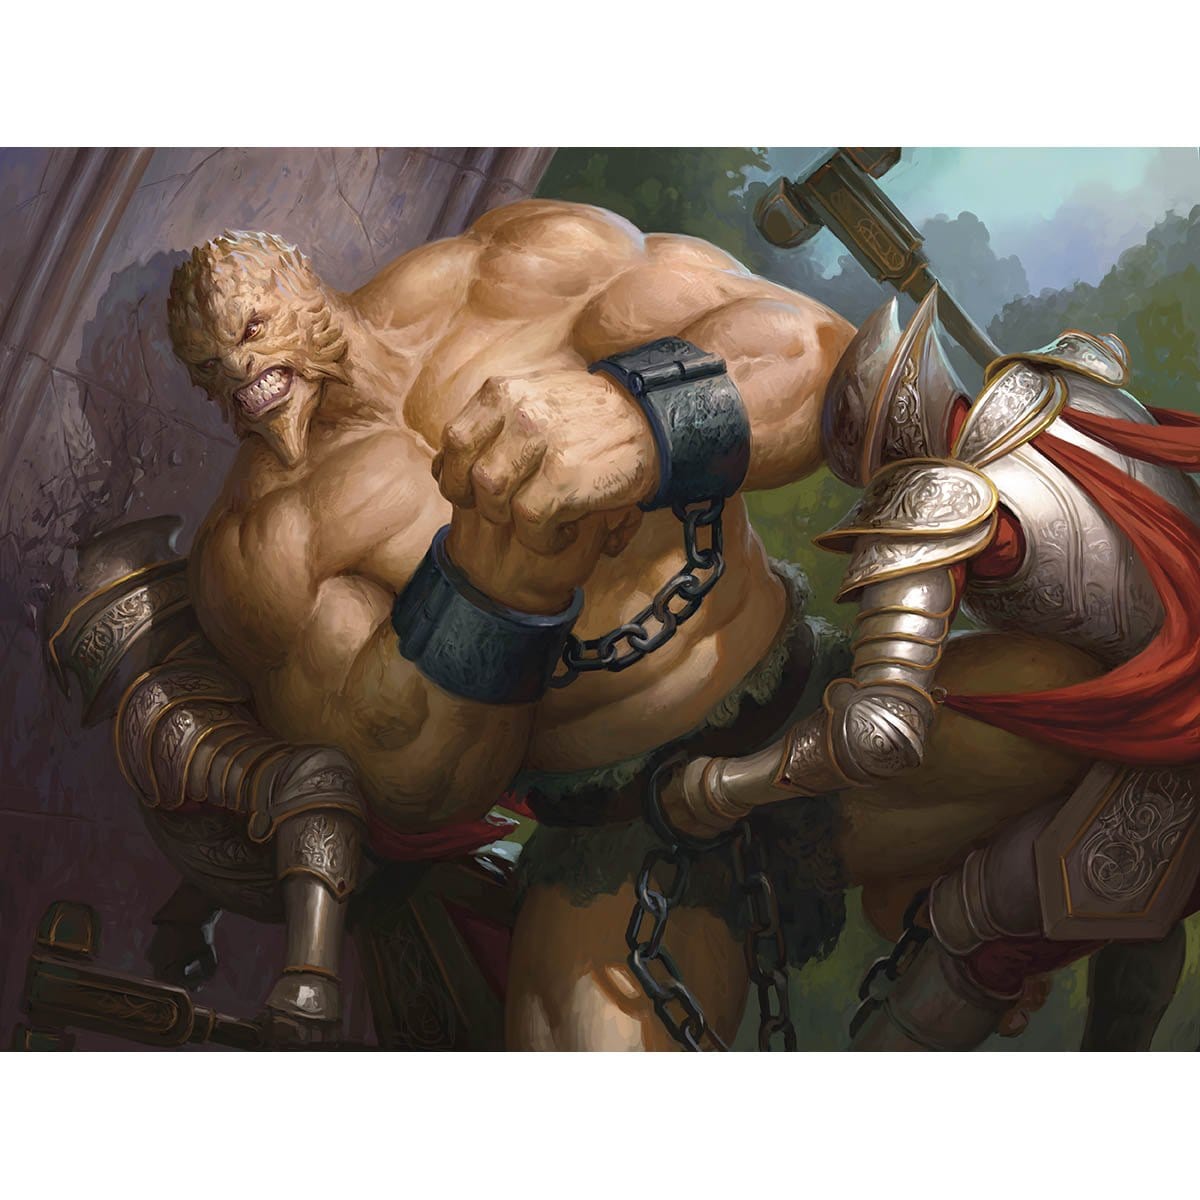 Weight Advantage Print - Print - Original Magic Art - Accessories for Magic the Gathering and other card games